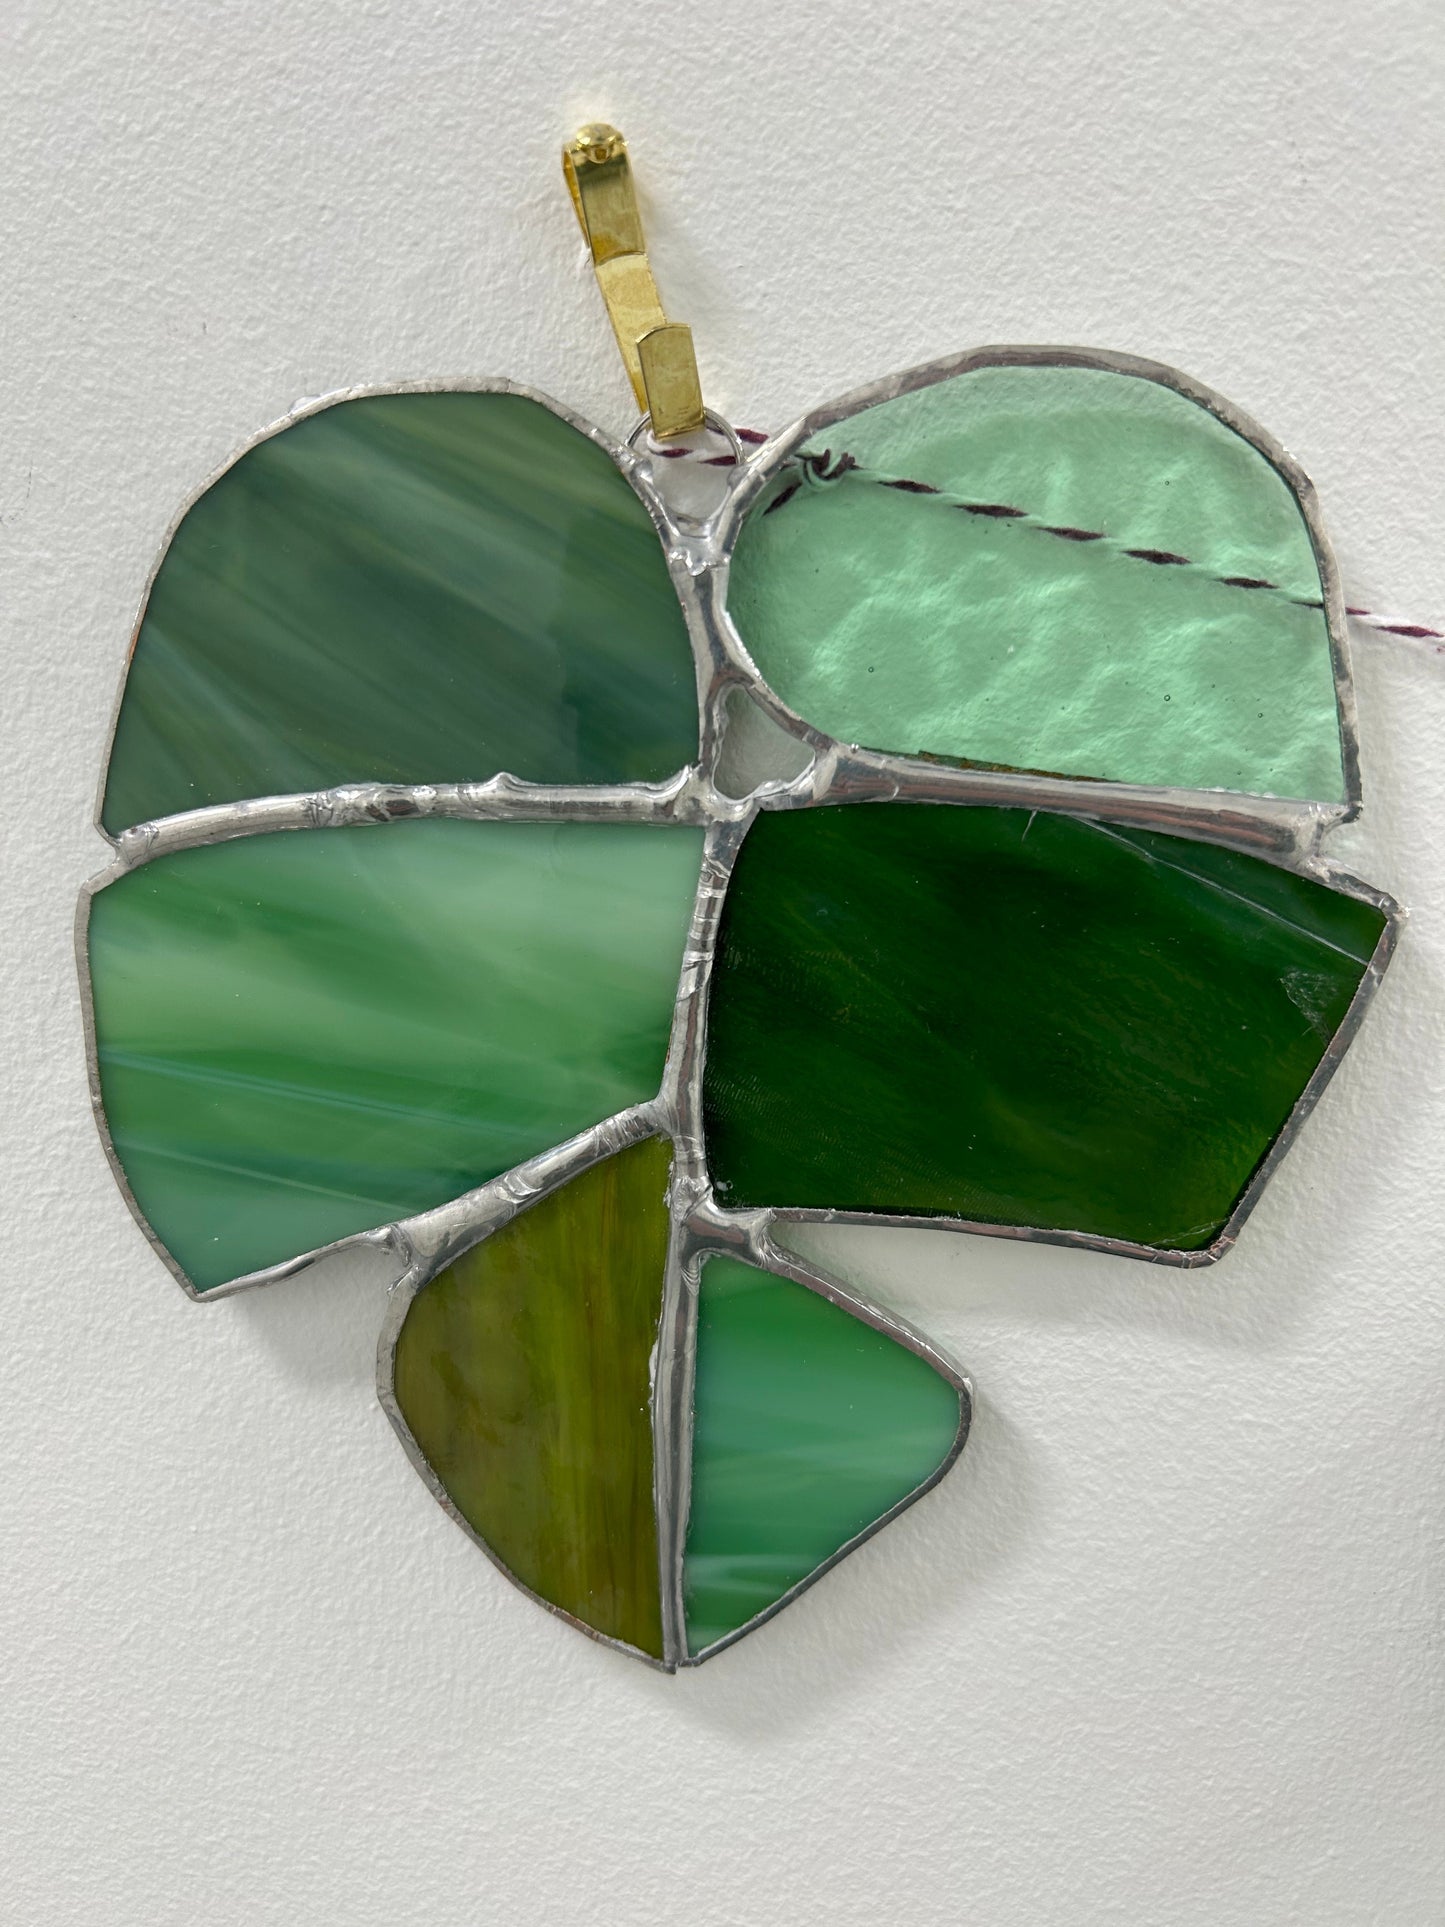 Beginner Stained Glass class, May 30, 11 -2:00 pm